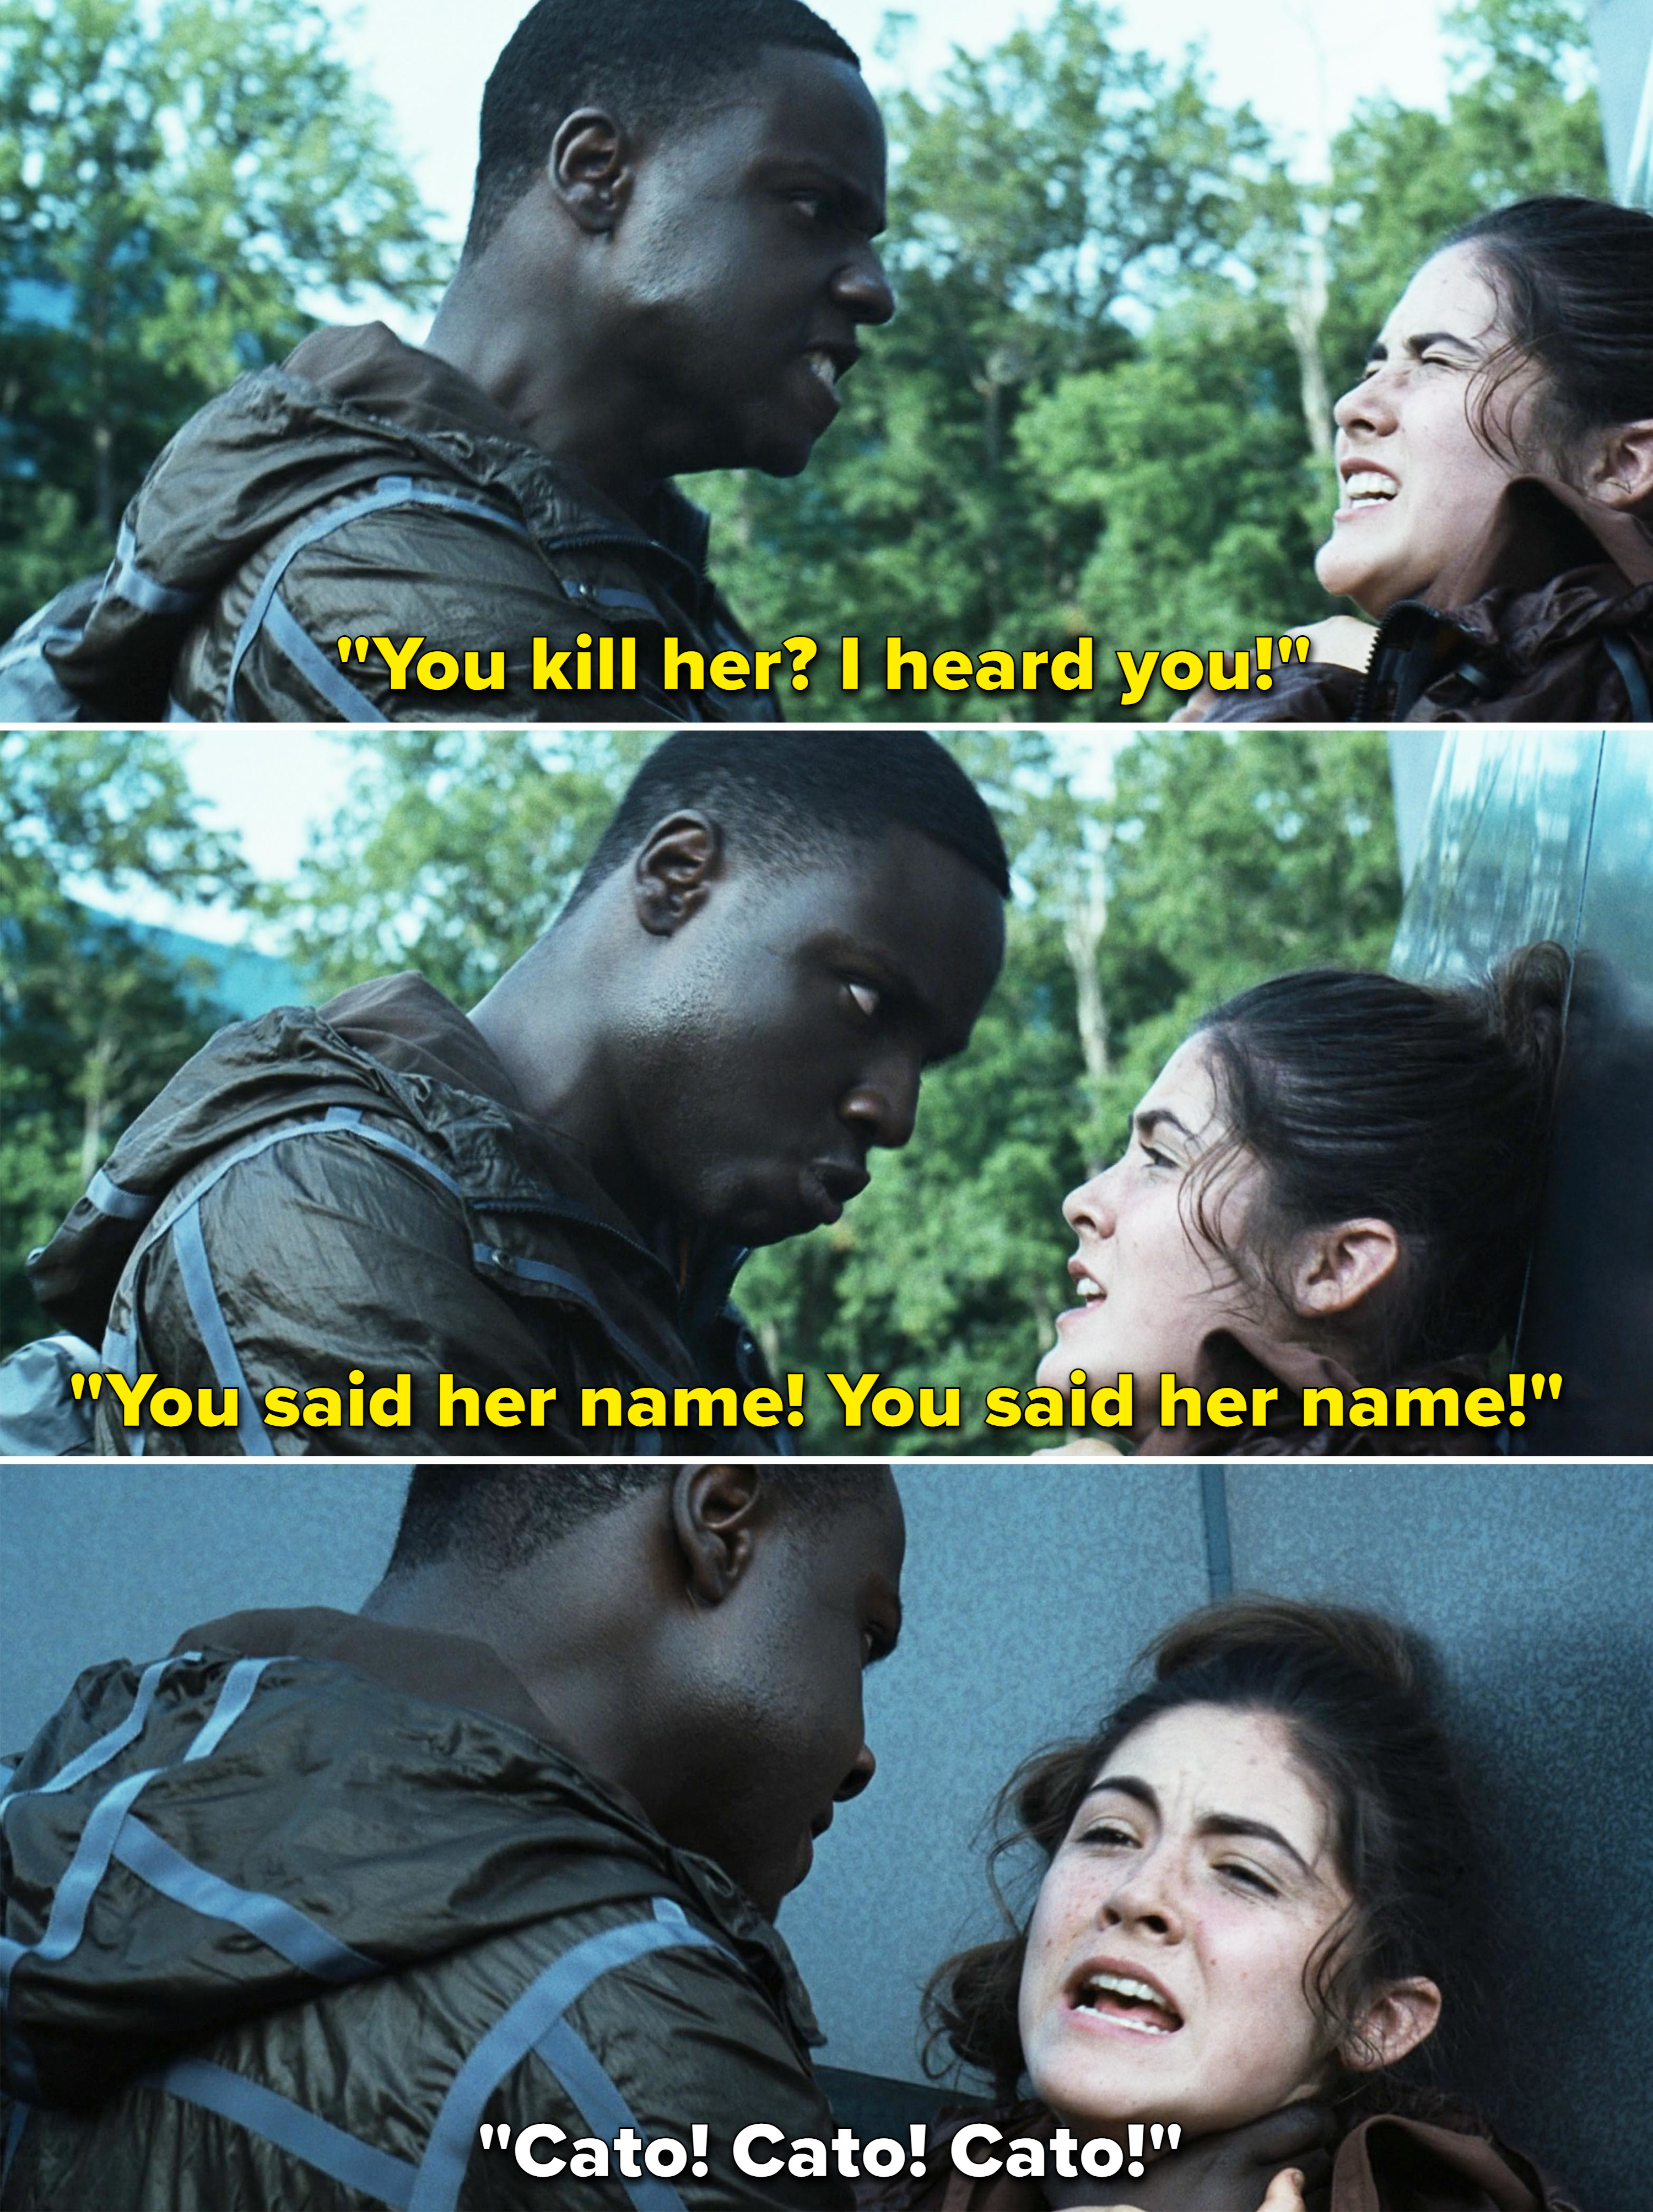 Cato says, you killed her, you said her name!